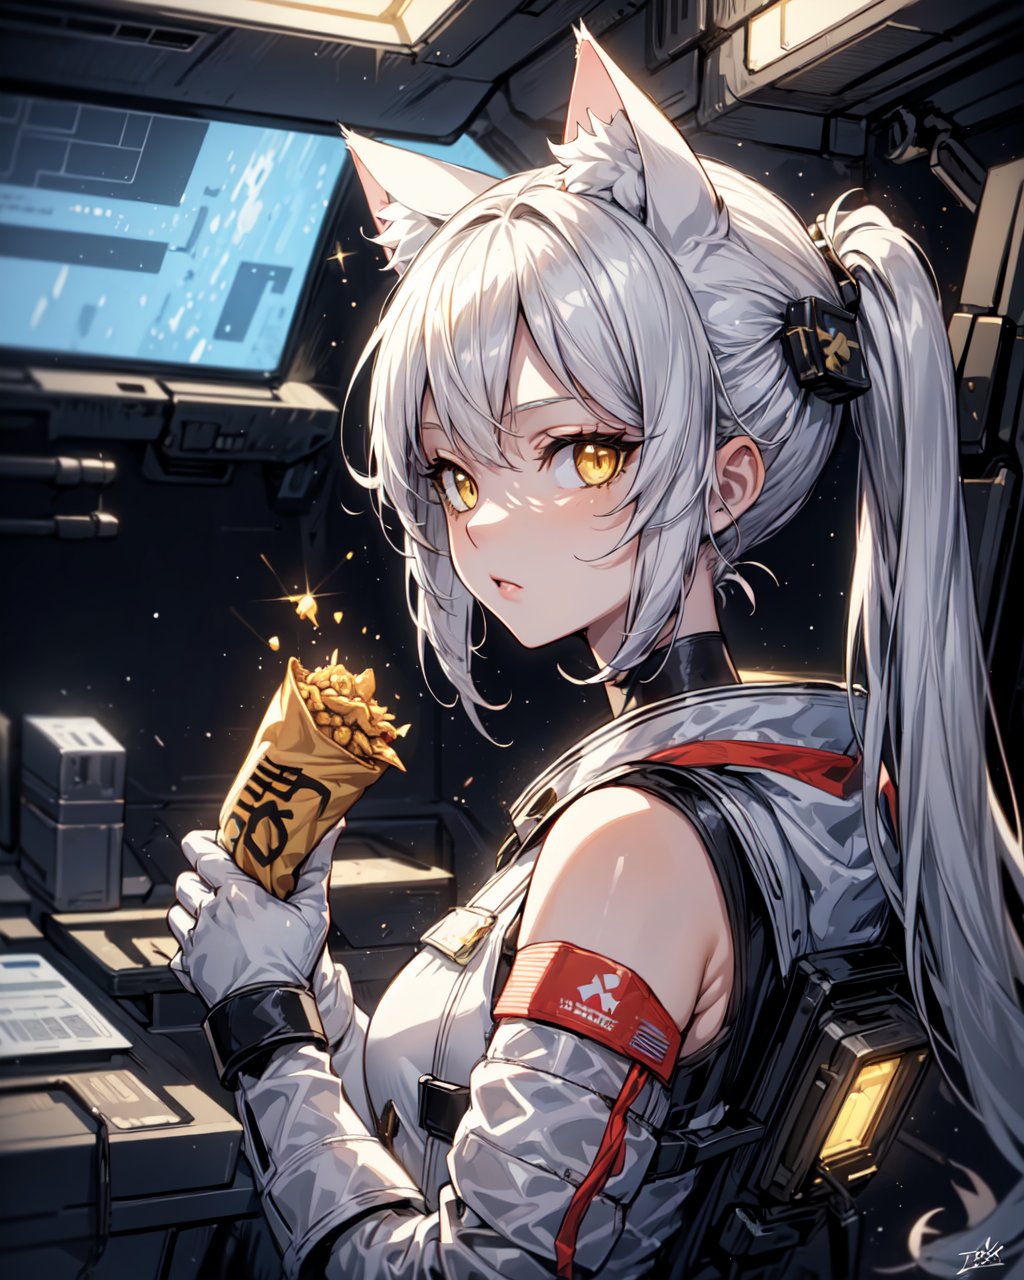 masterpiece, best quality, 1girl, spacecraft interior, spacesuit, upper body, from side, science fiction, yellow eyes, twintails, silver hair, cat ears, looking at viewer,
,Tex Mex Burrito Style,1 girl